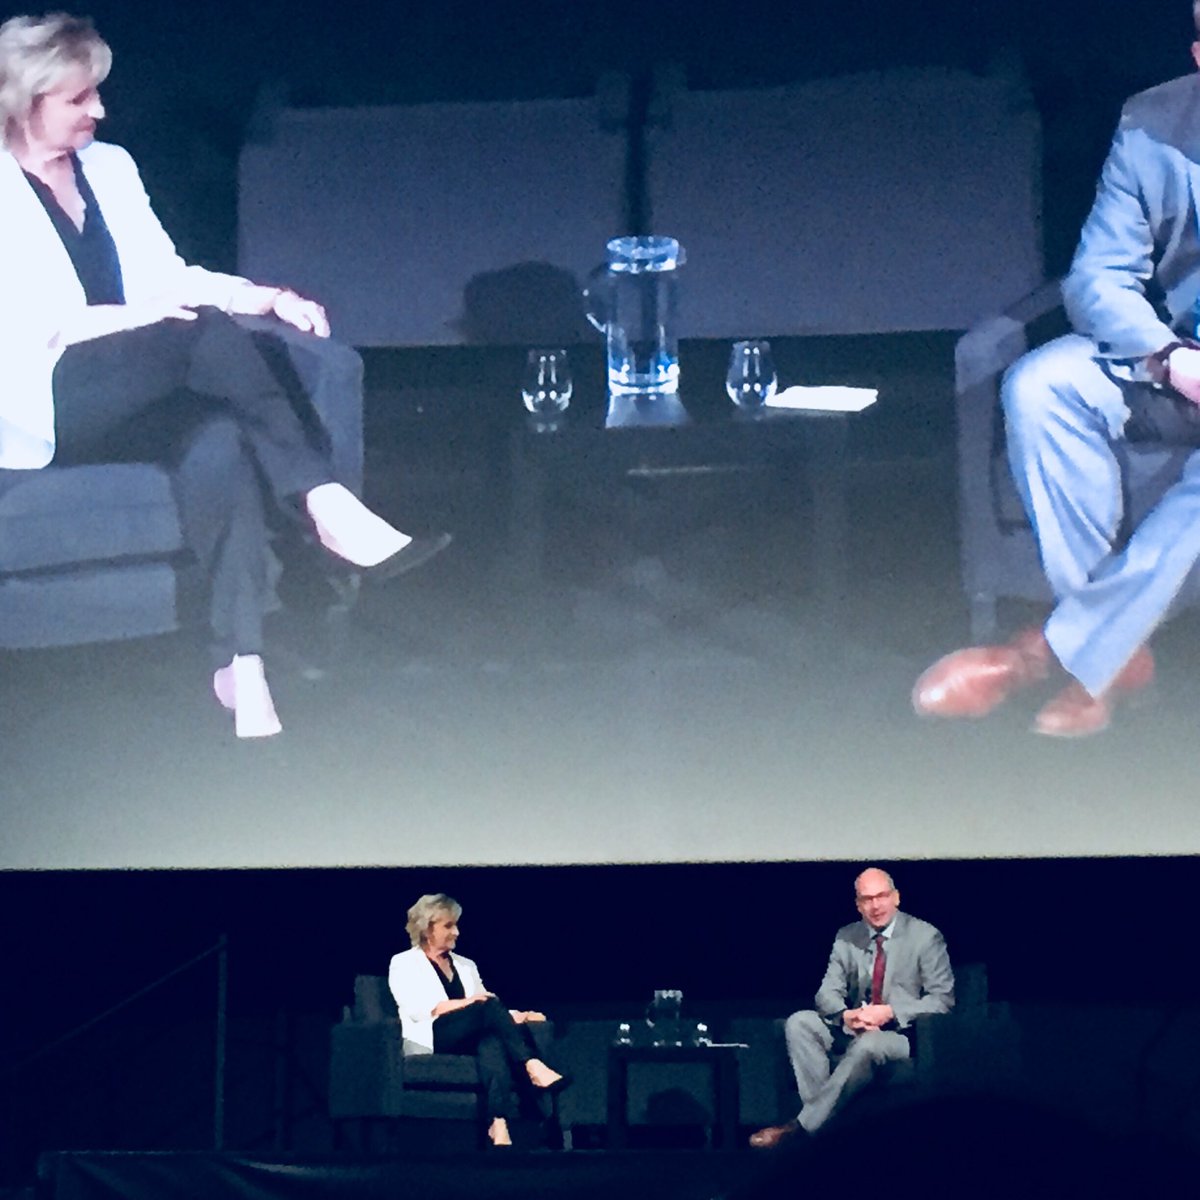 Mind and curiosity fed. Really enjoyed the conversation between Tina Brown and David Walmsley + great audience questions, too! Thanks for a lovely start to the weekend, @hotdocs. #CuriousMindsWeekend